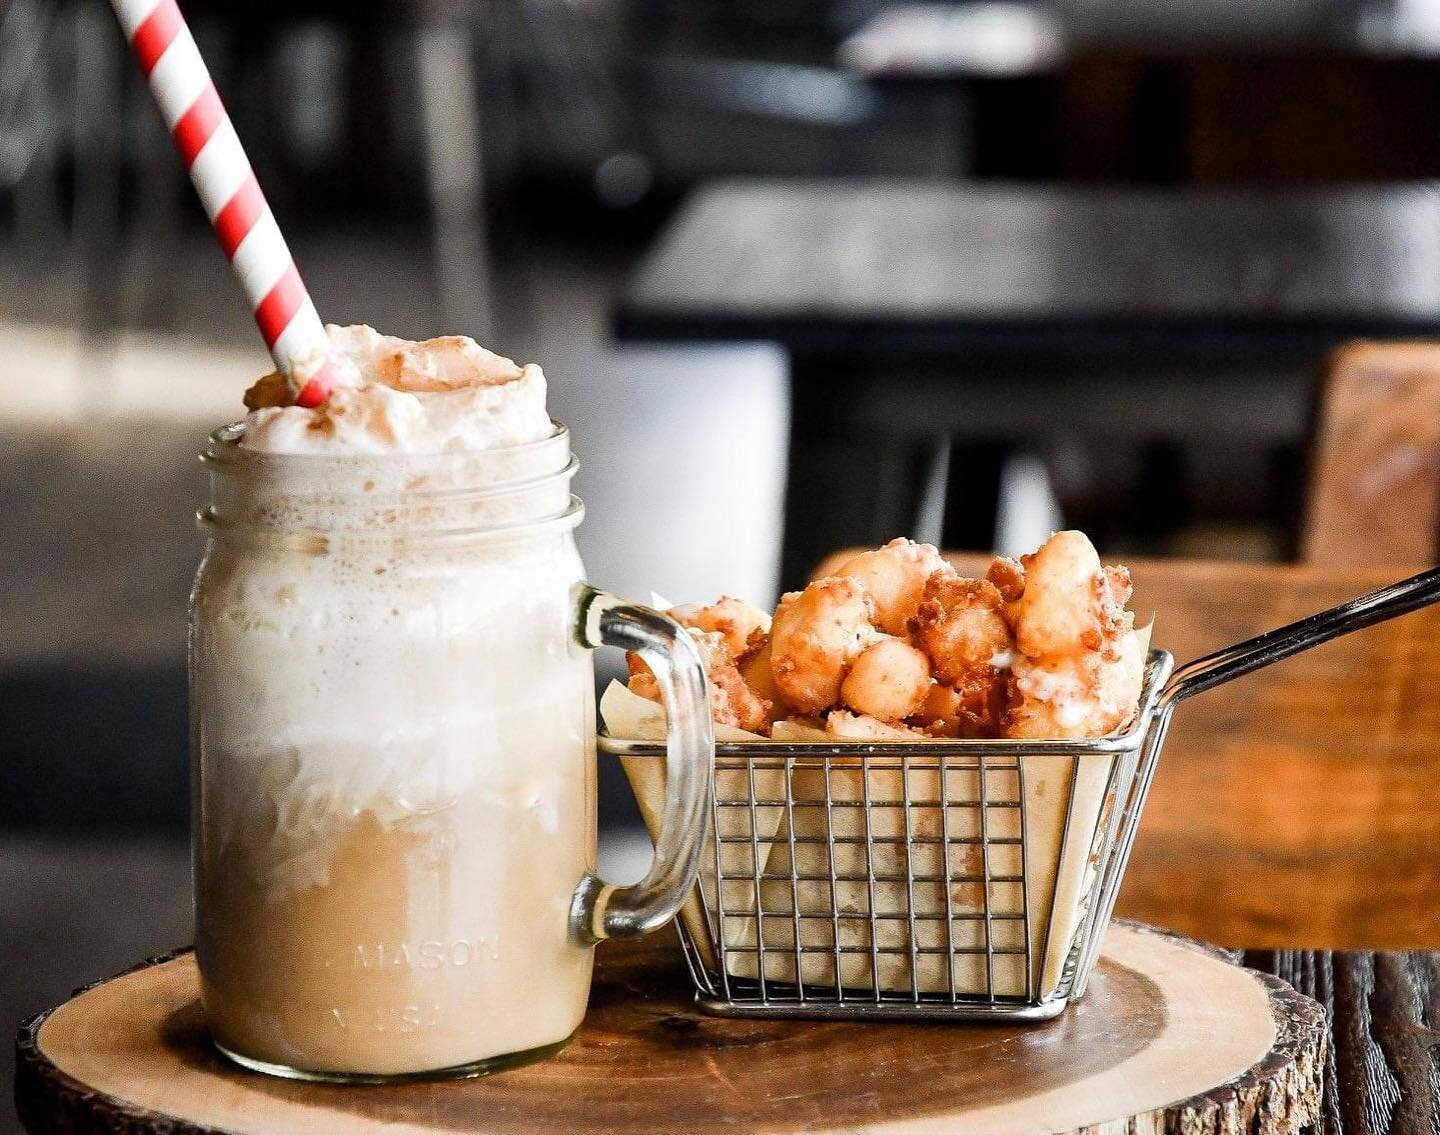 Calling all cheese curd fans! Today we are open from 11:30am-9pm, stop in and see us with indoor/outdoor dining and online ordering/curbside pick-up. #cheesecurds #rootbeerfloat #yum #getinmybelly #getinmybelly😋 #eatdrinklocal #craftdistillery #dist